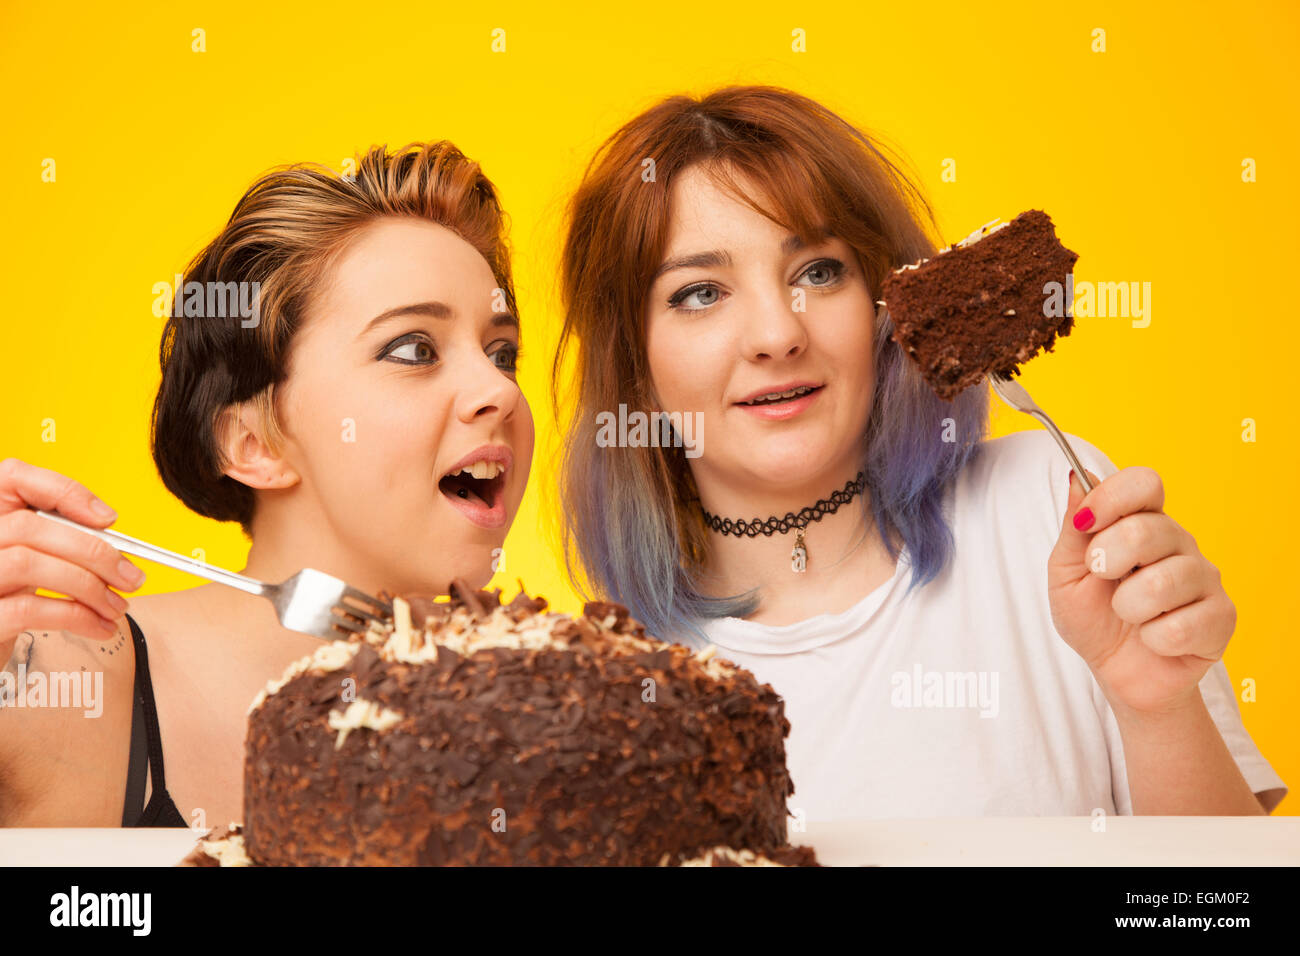 Two young woman about to eat a large chocolate cake. Stock Photo